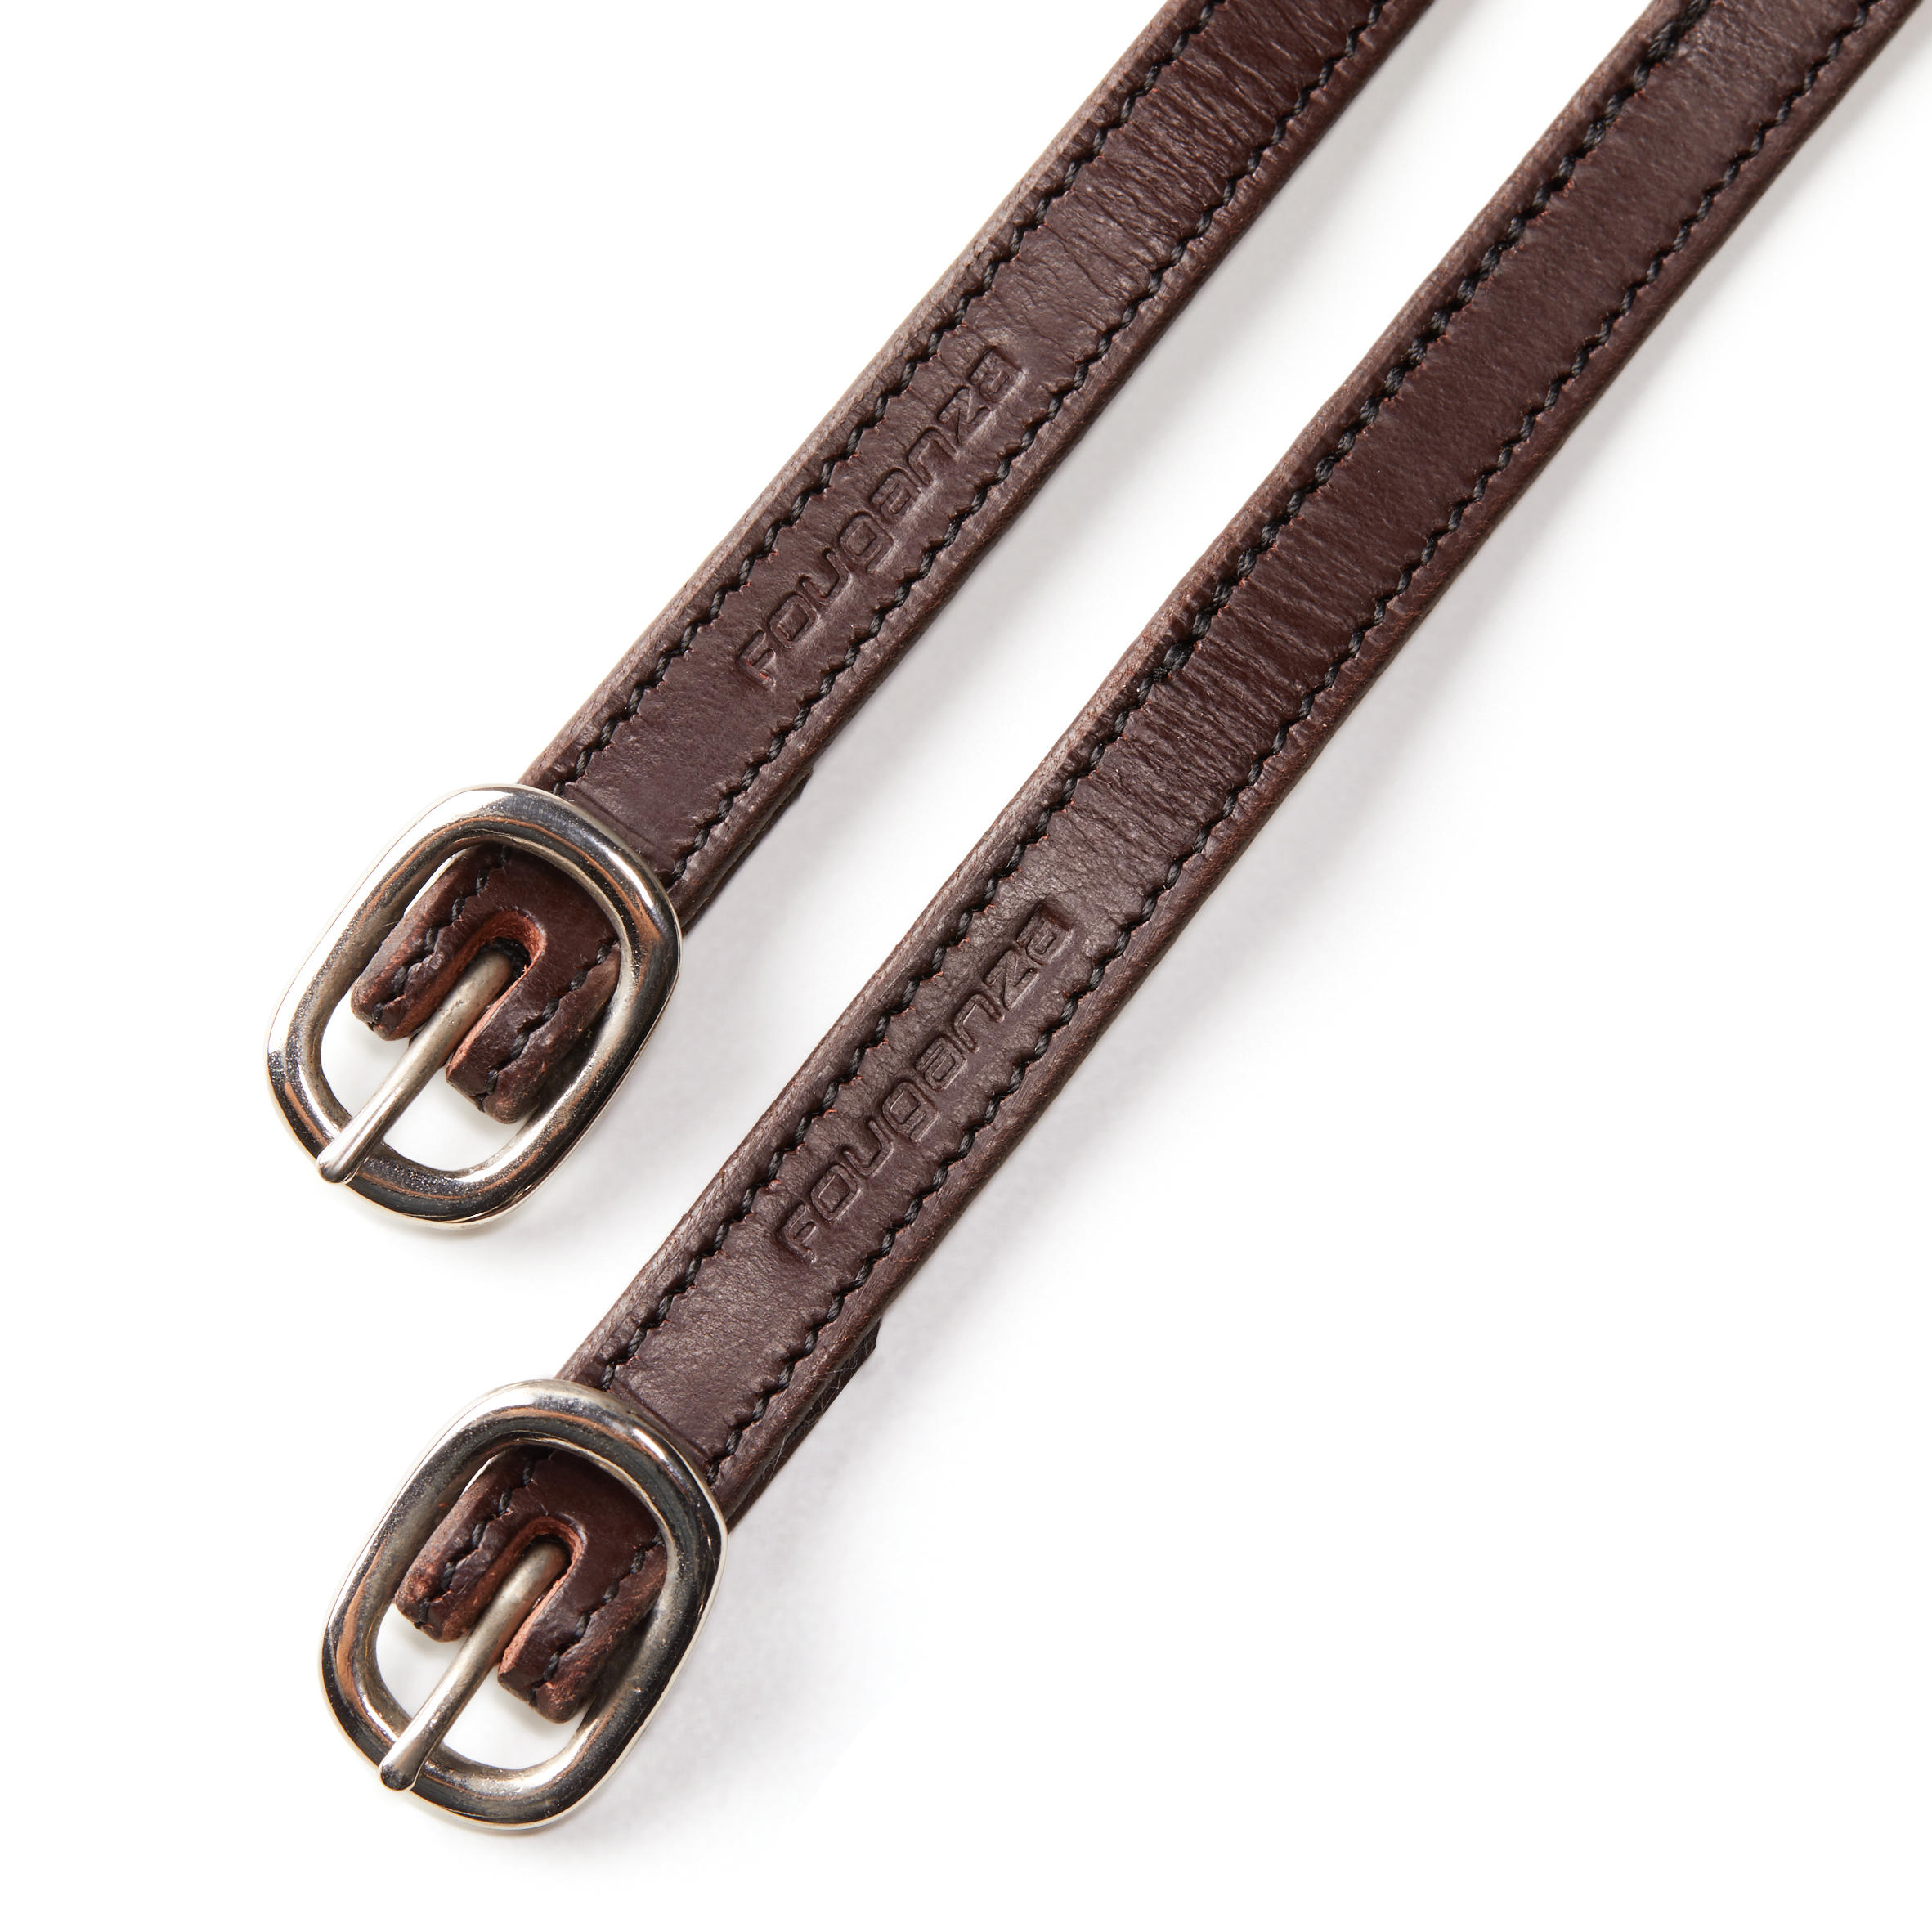 500 Horse Riding Leather Spur Straps - Brown 2/3